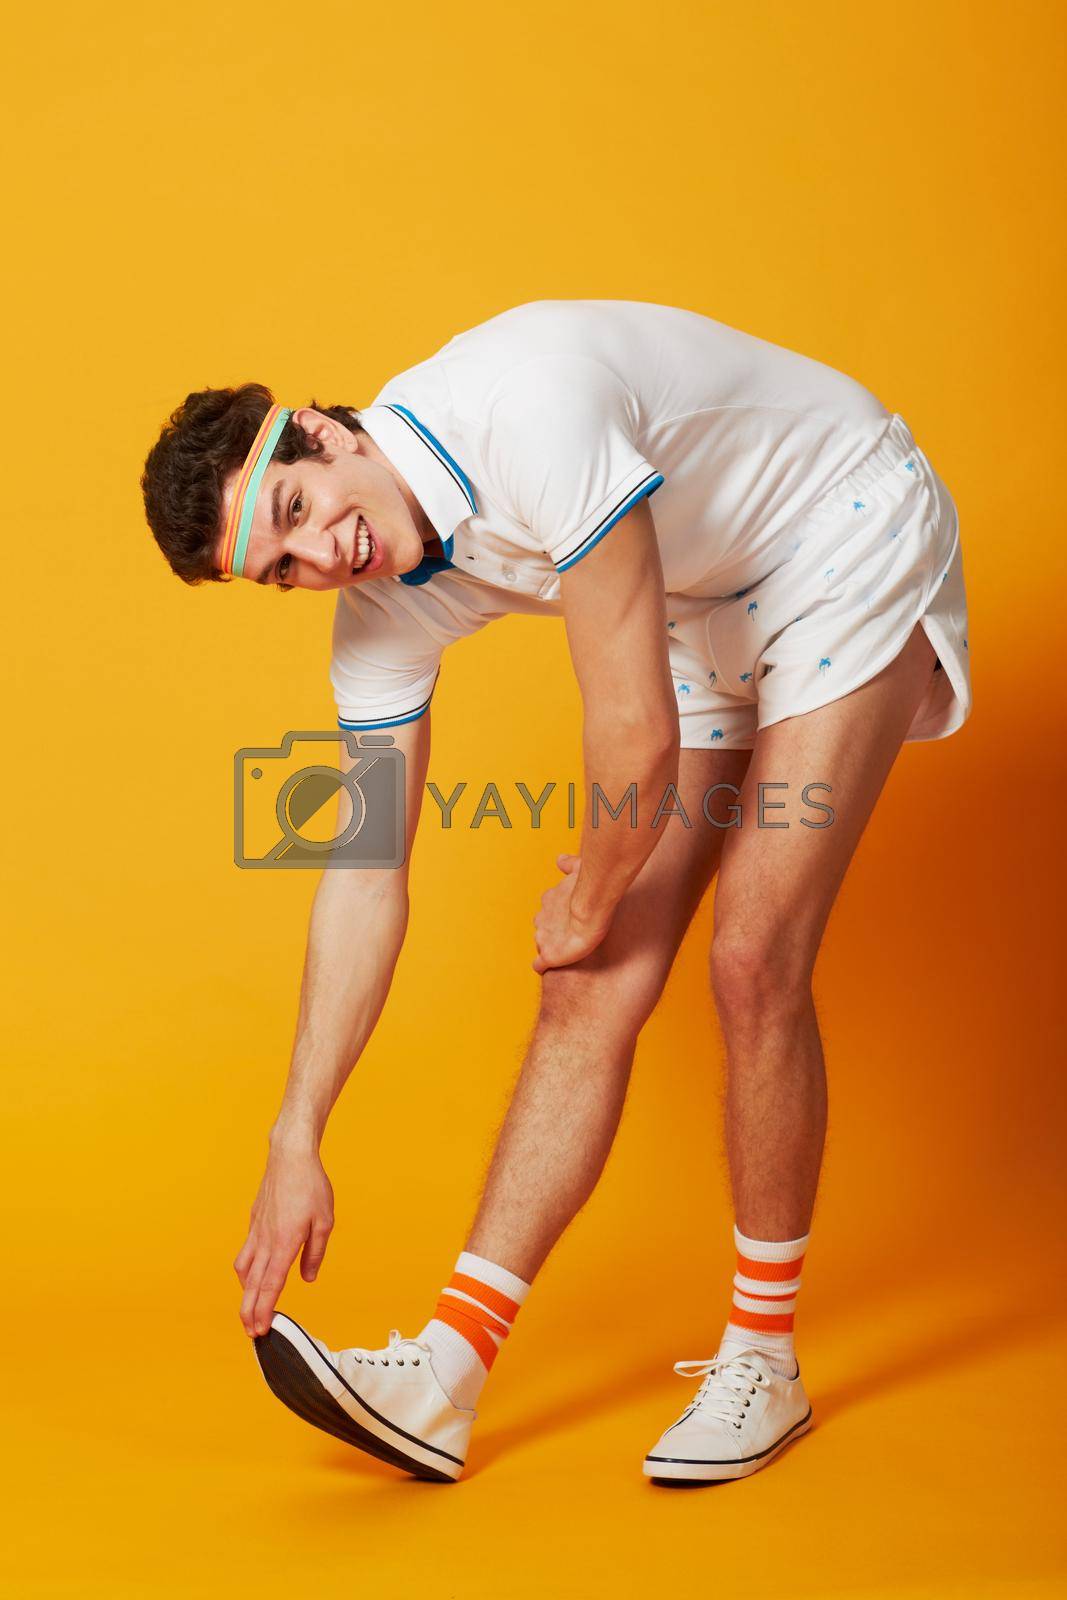 Royalty free image of Stretch it out. A male stretching out his calf muscle in retro sports gear. by YuriArcurs